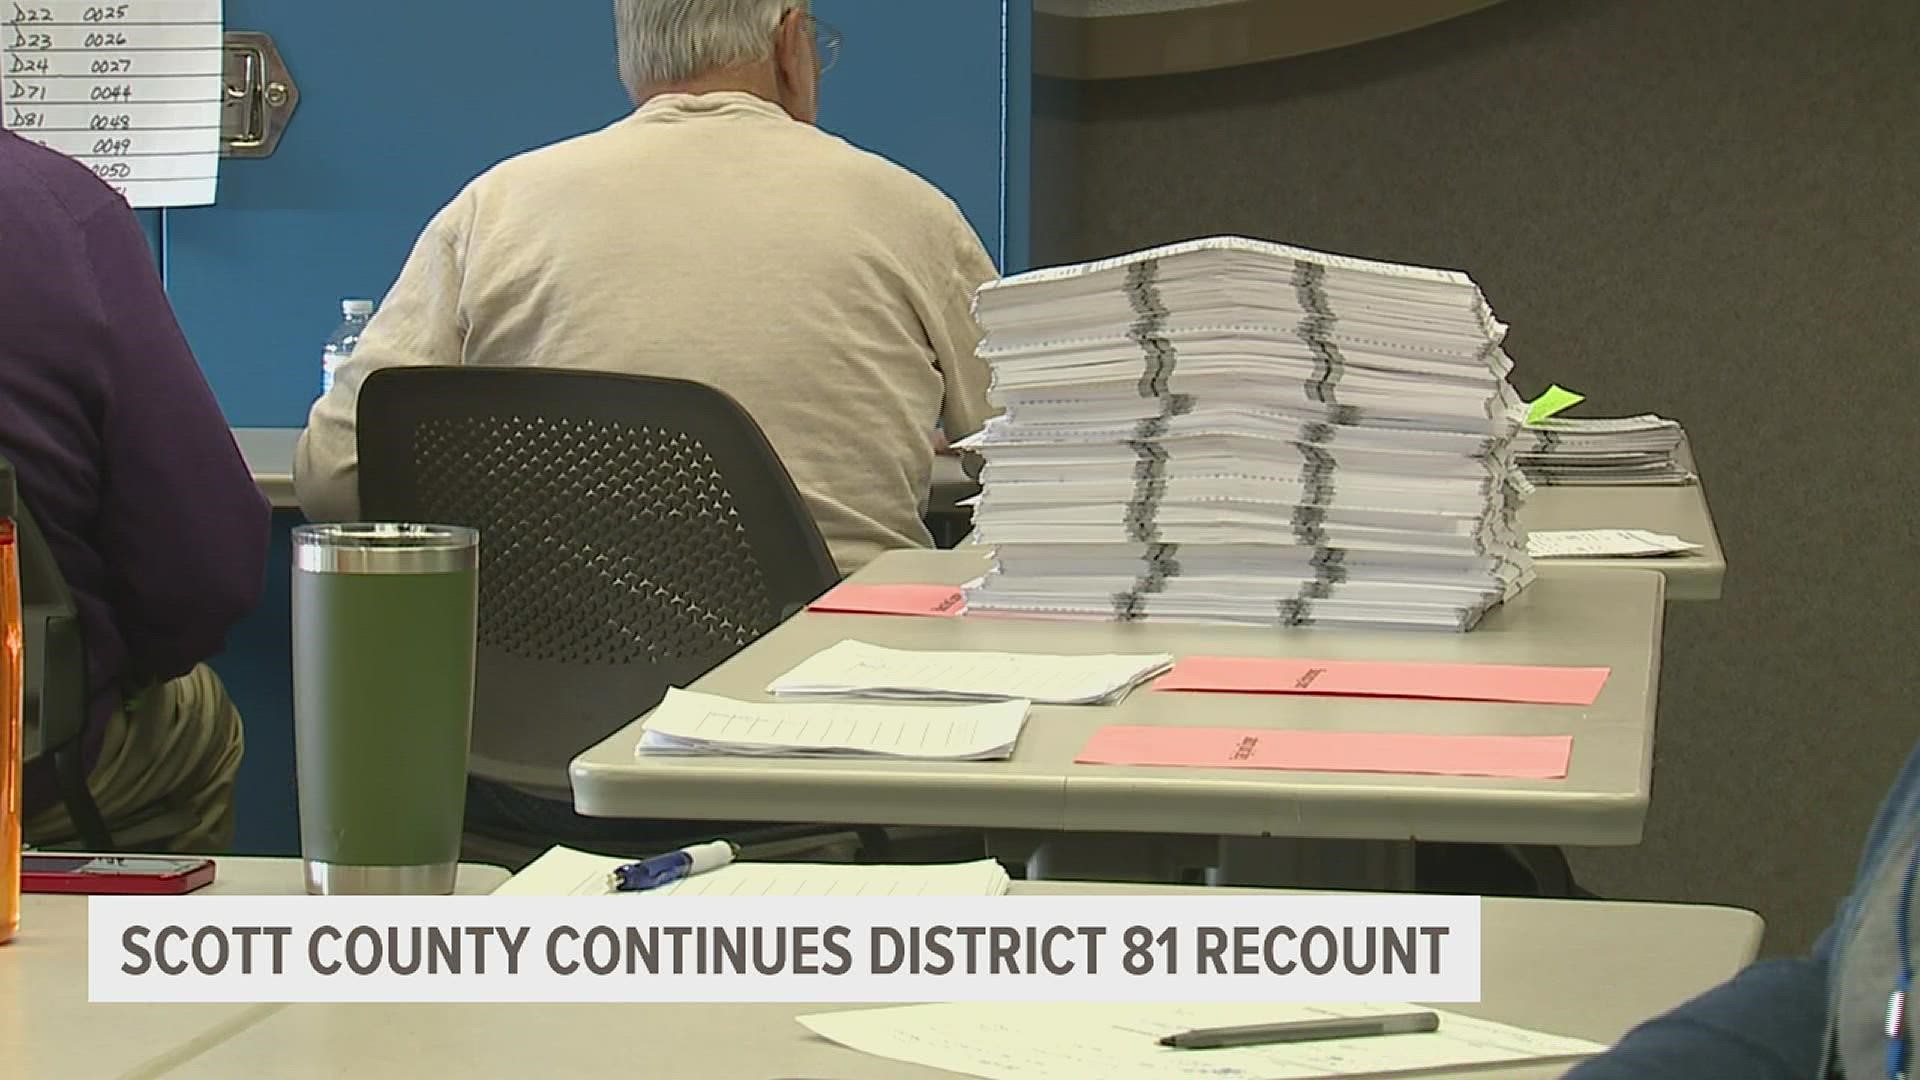 Republican candidate Luana Stoltenberg requested the recount last week after Democratic candidate Craig Cooper won the race by six votes.